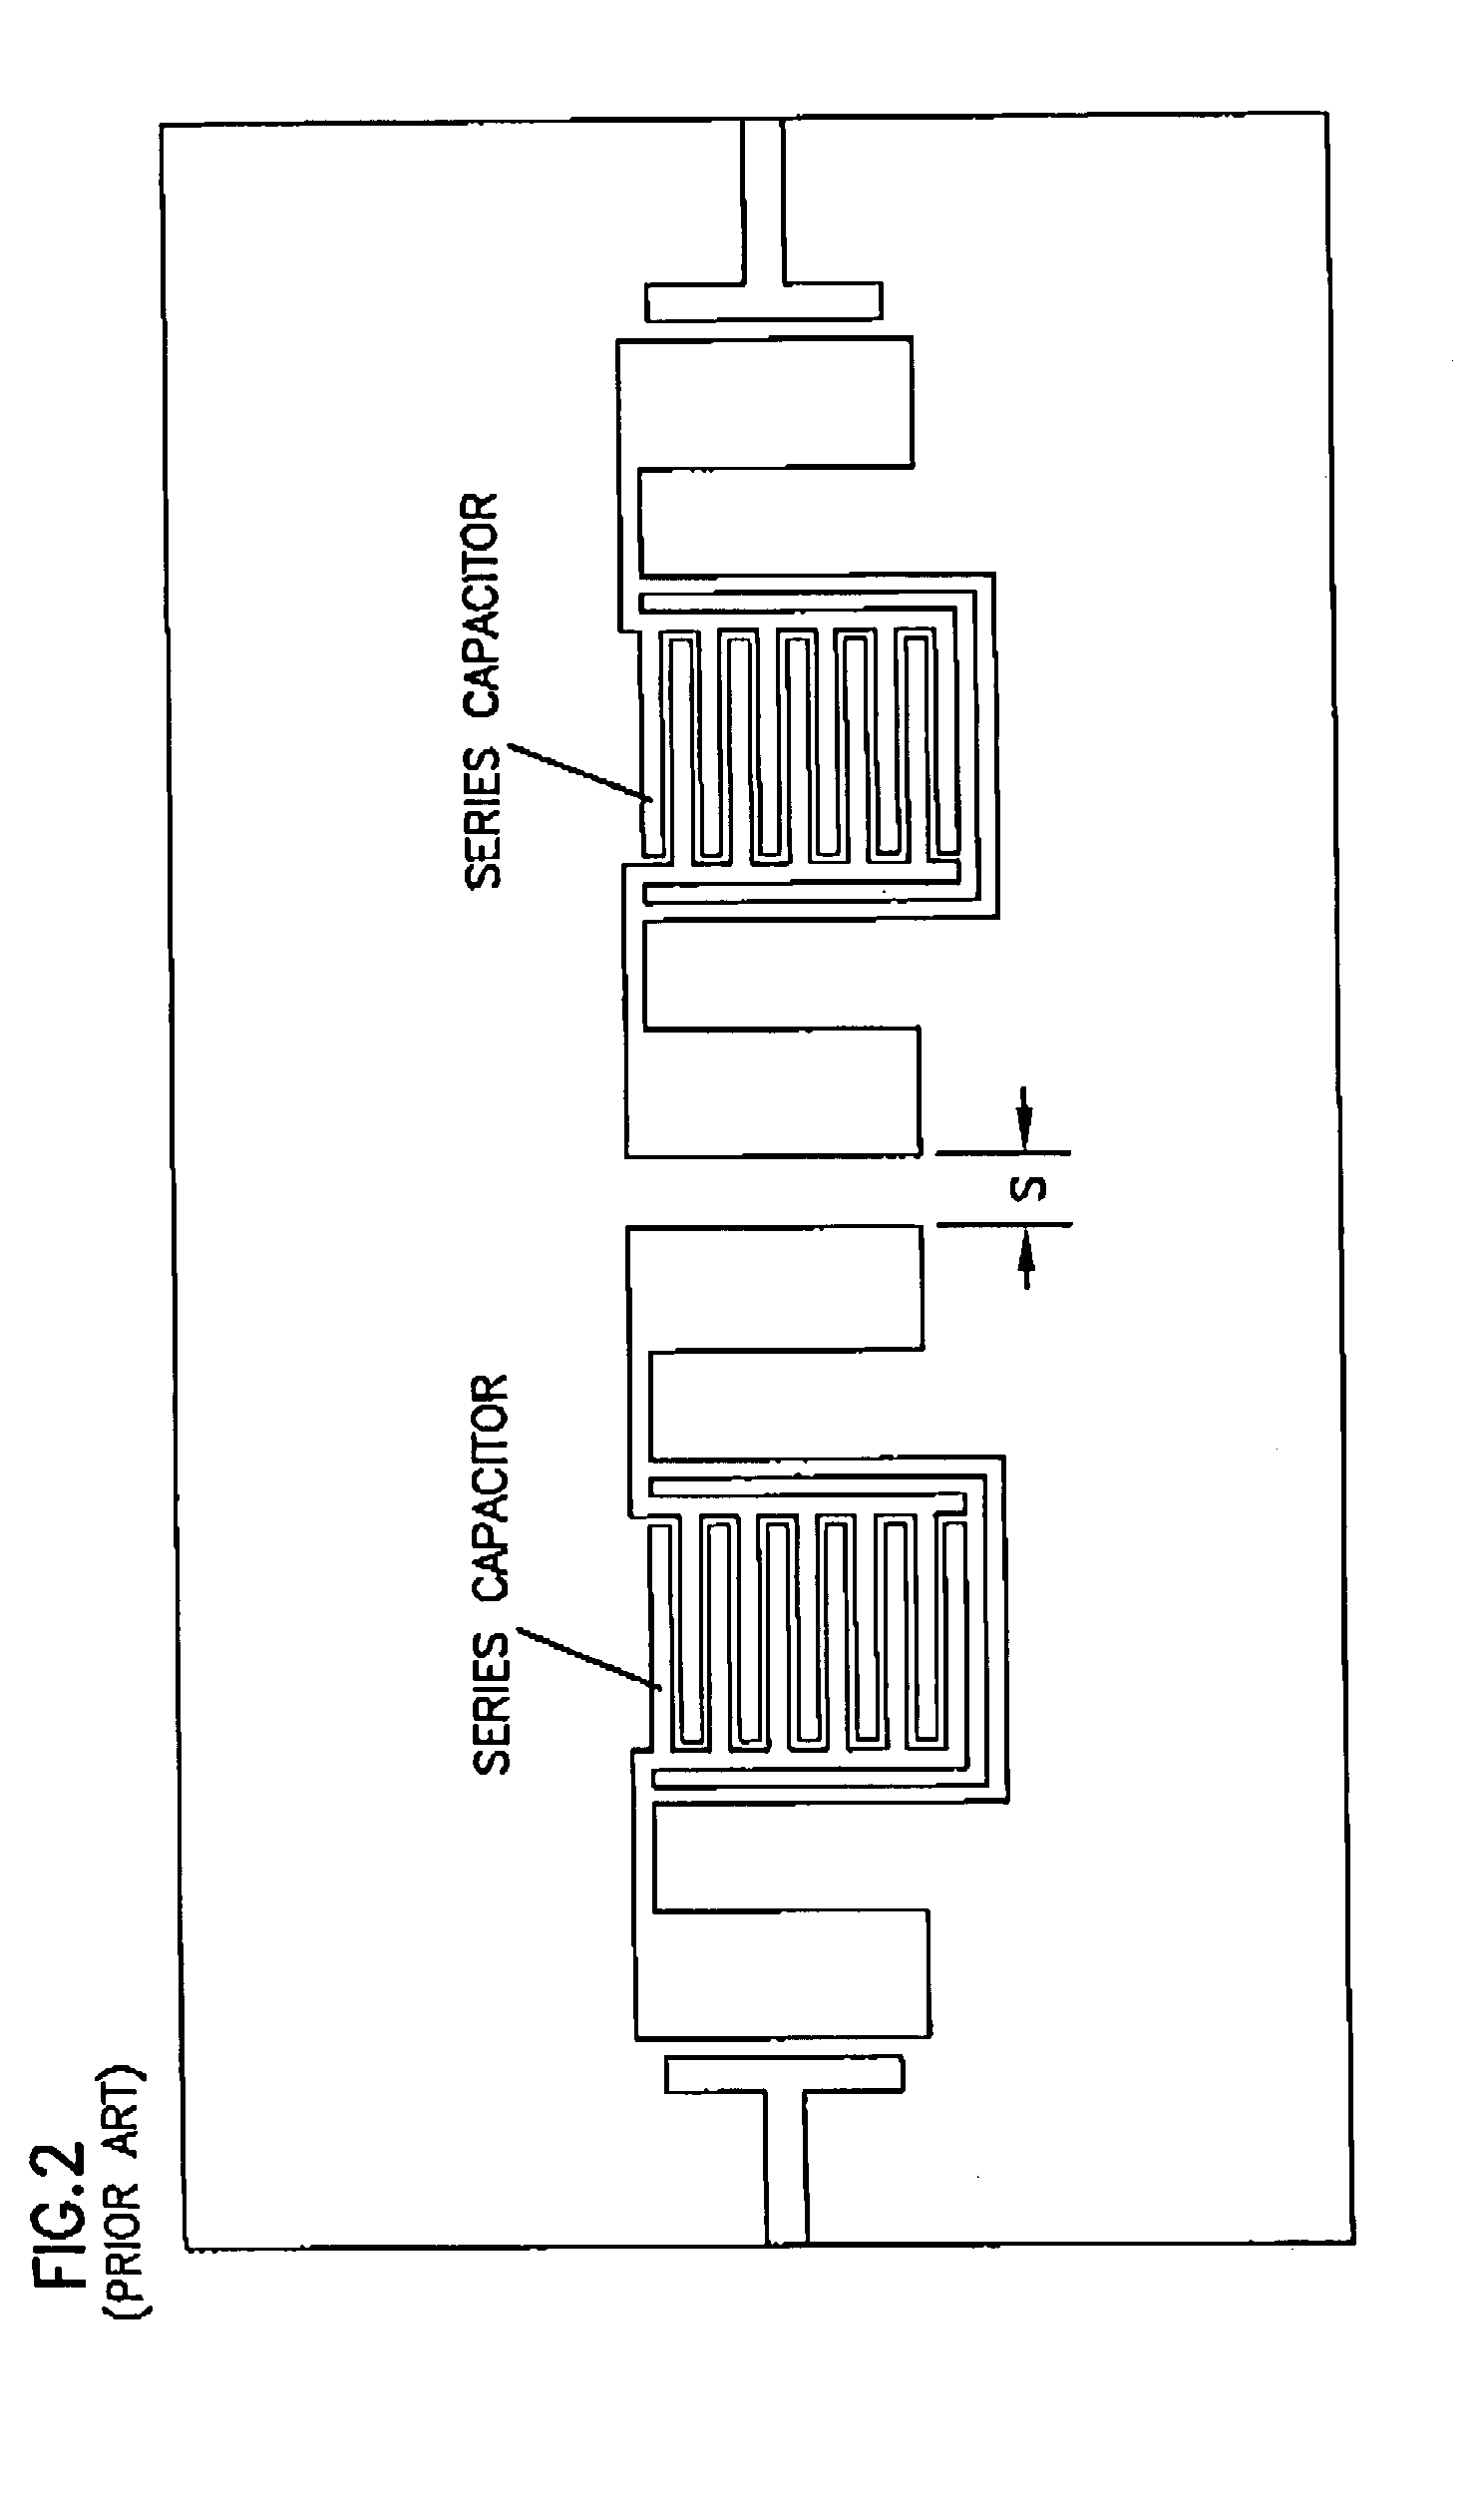 Microstrip filter including resonators having ends at different coupling distances